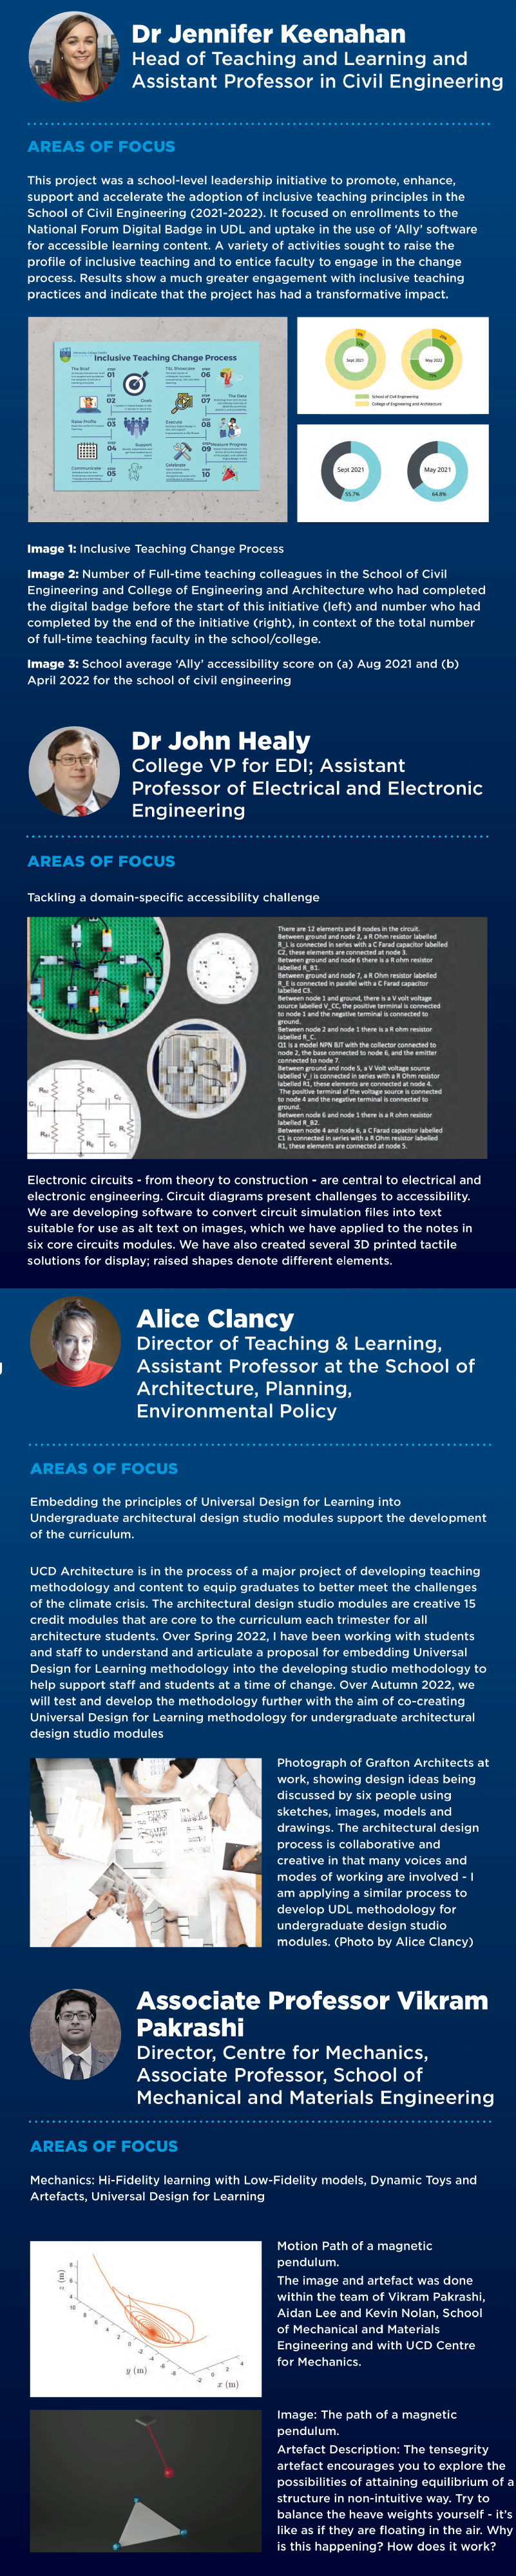 Poster for College of Engineering and Architecture Faculty Partners